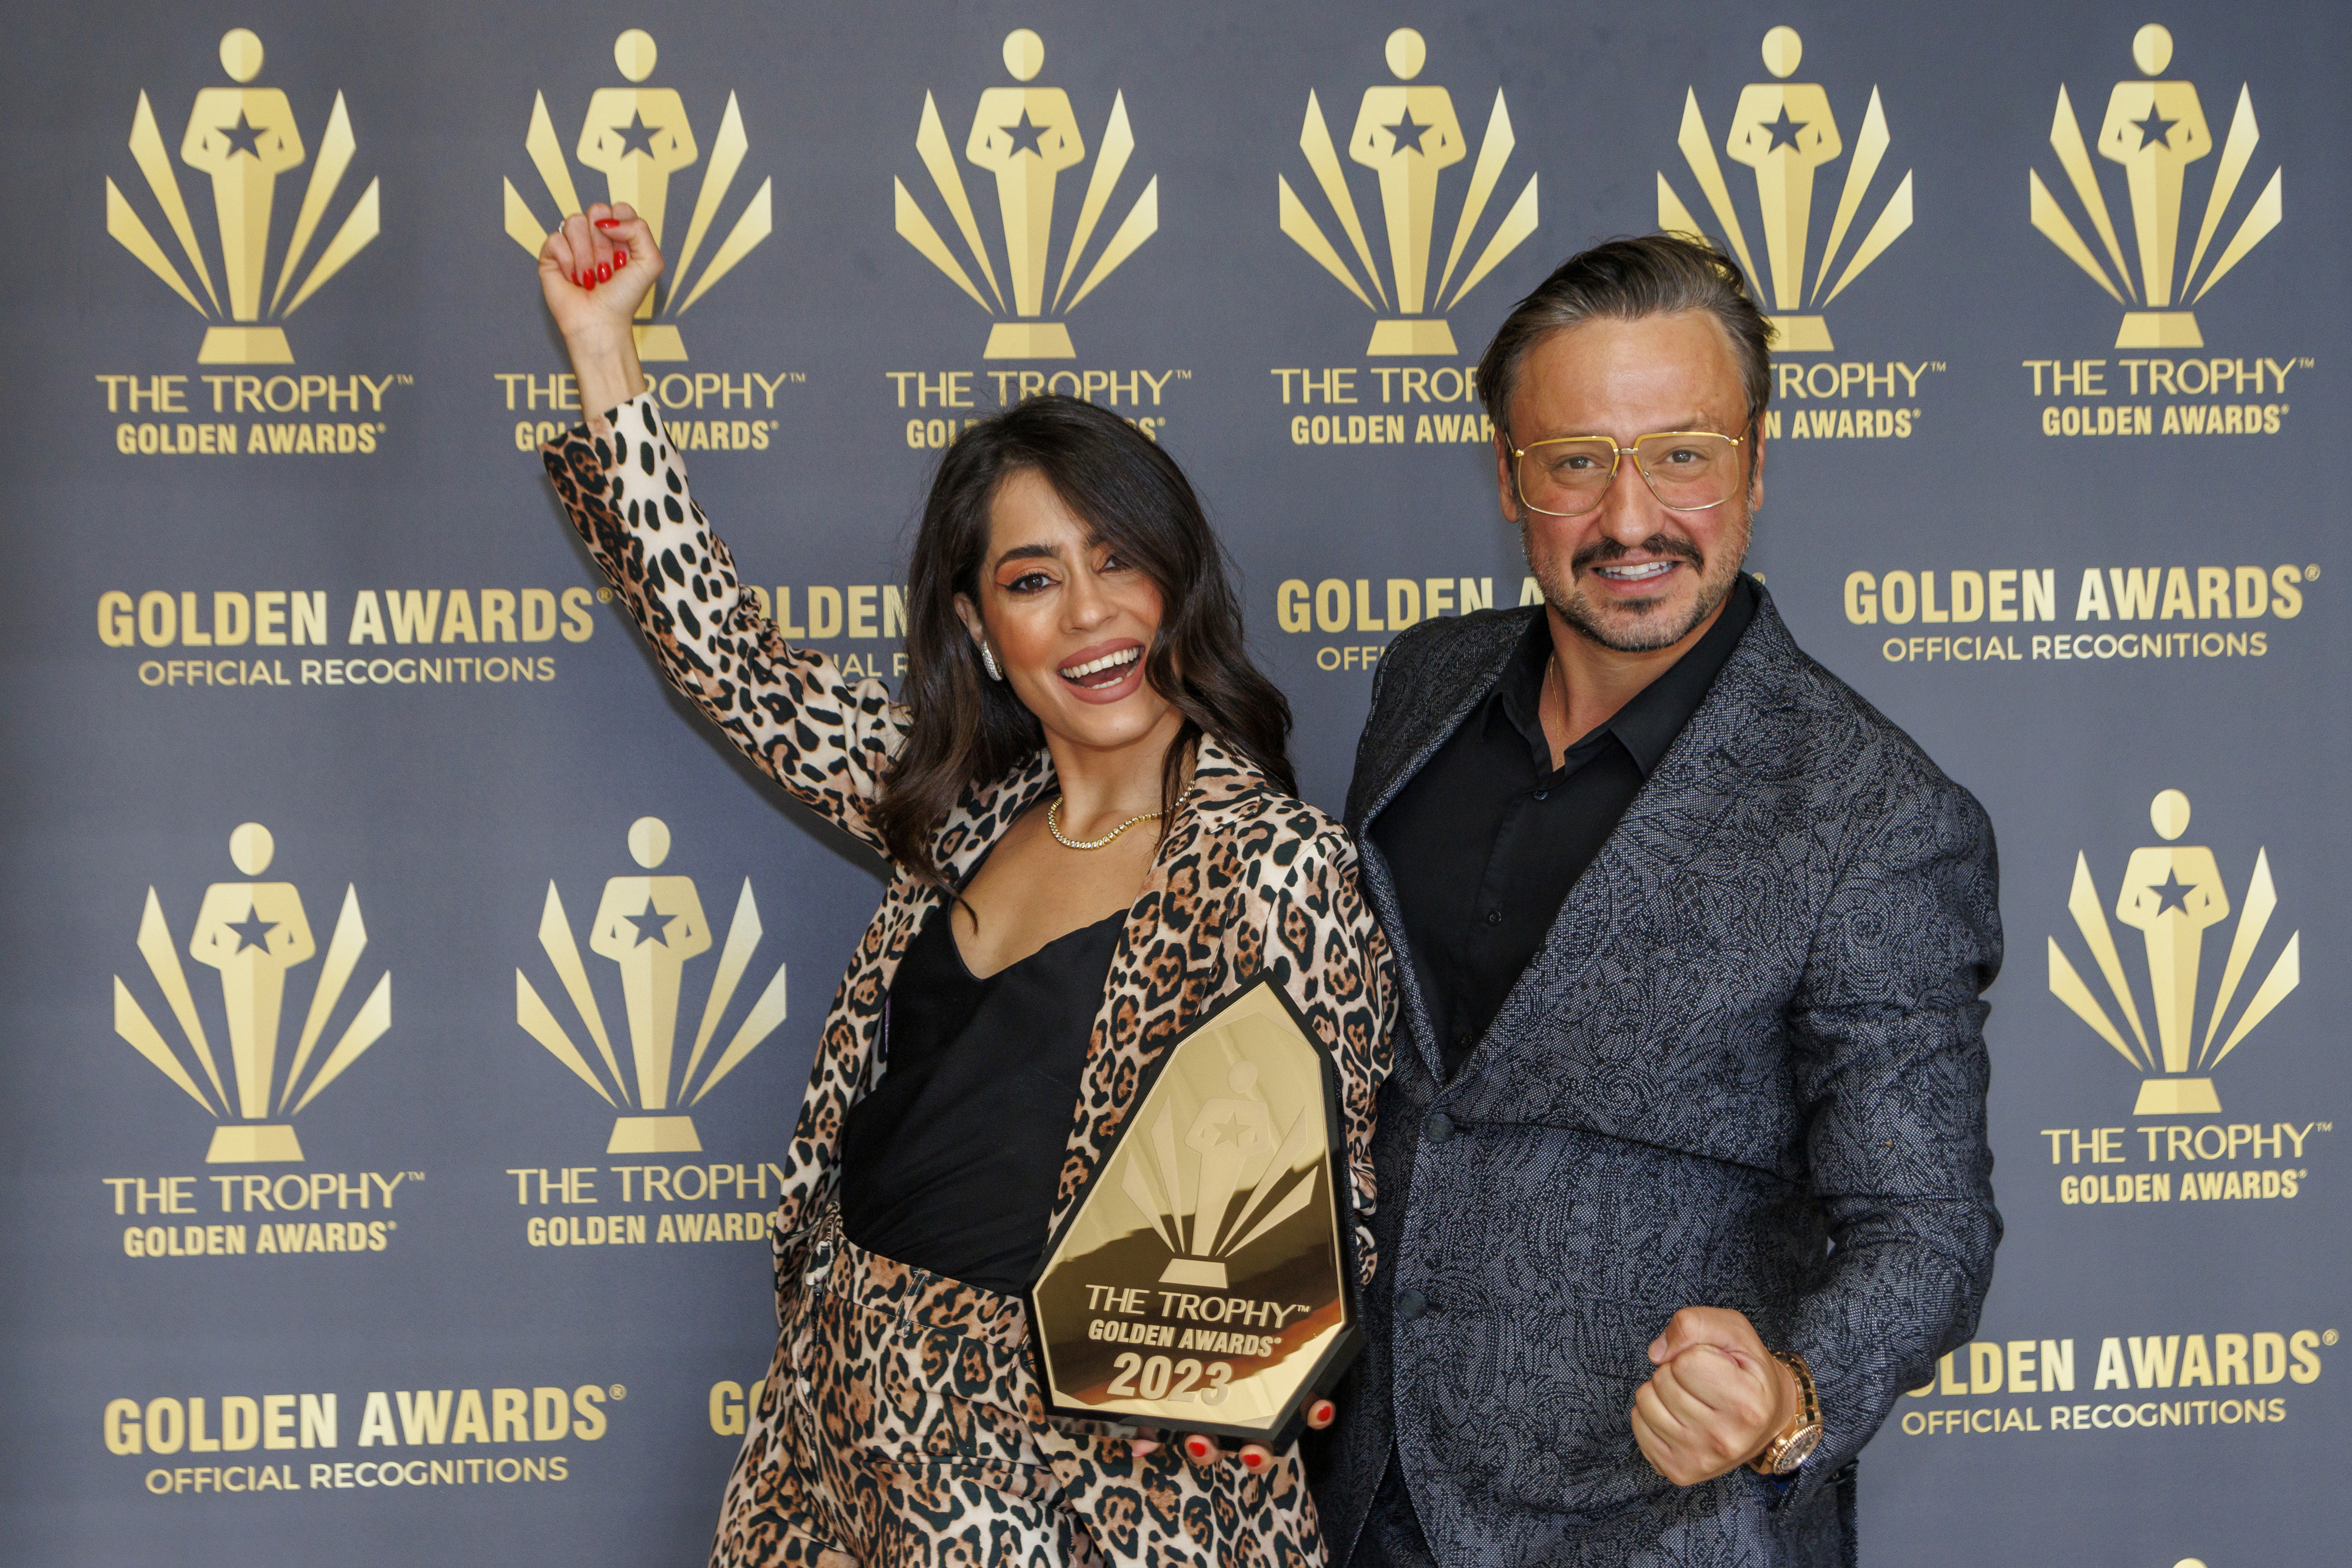 GOLDEN_AWARDS_The_Trophy_angelopoulos_hair_co_17_